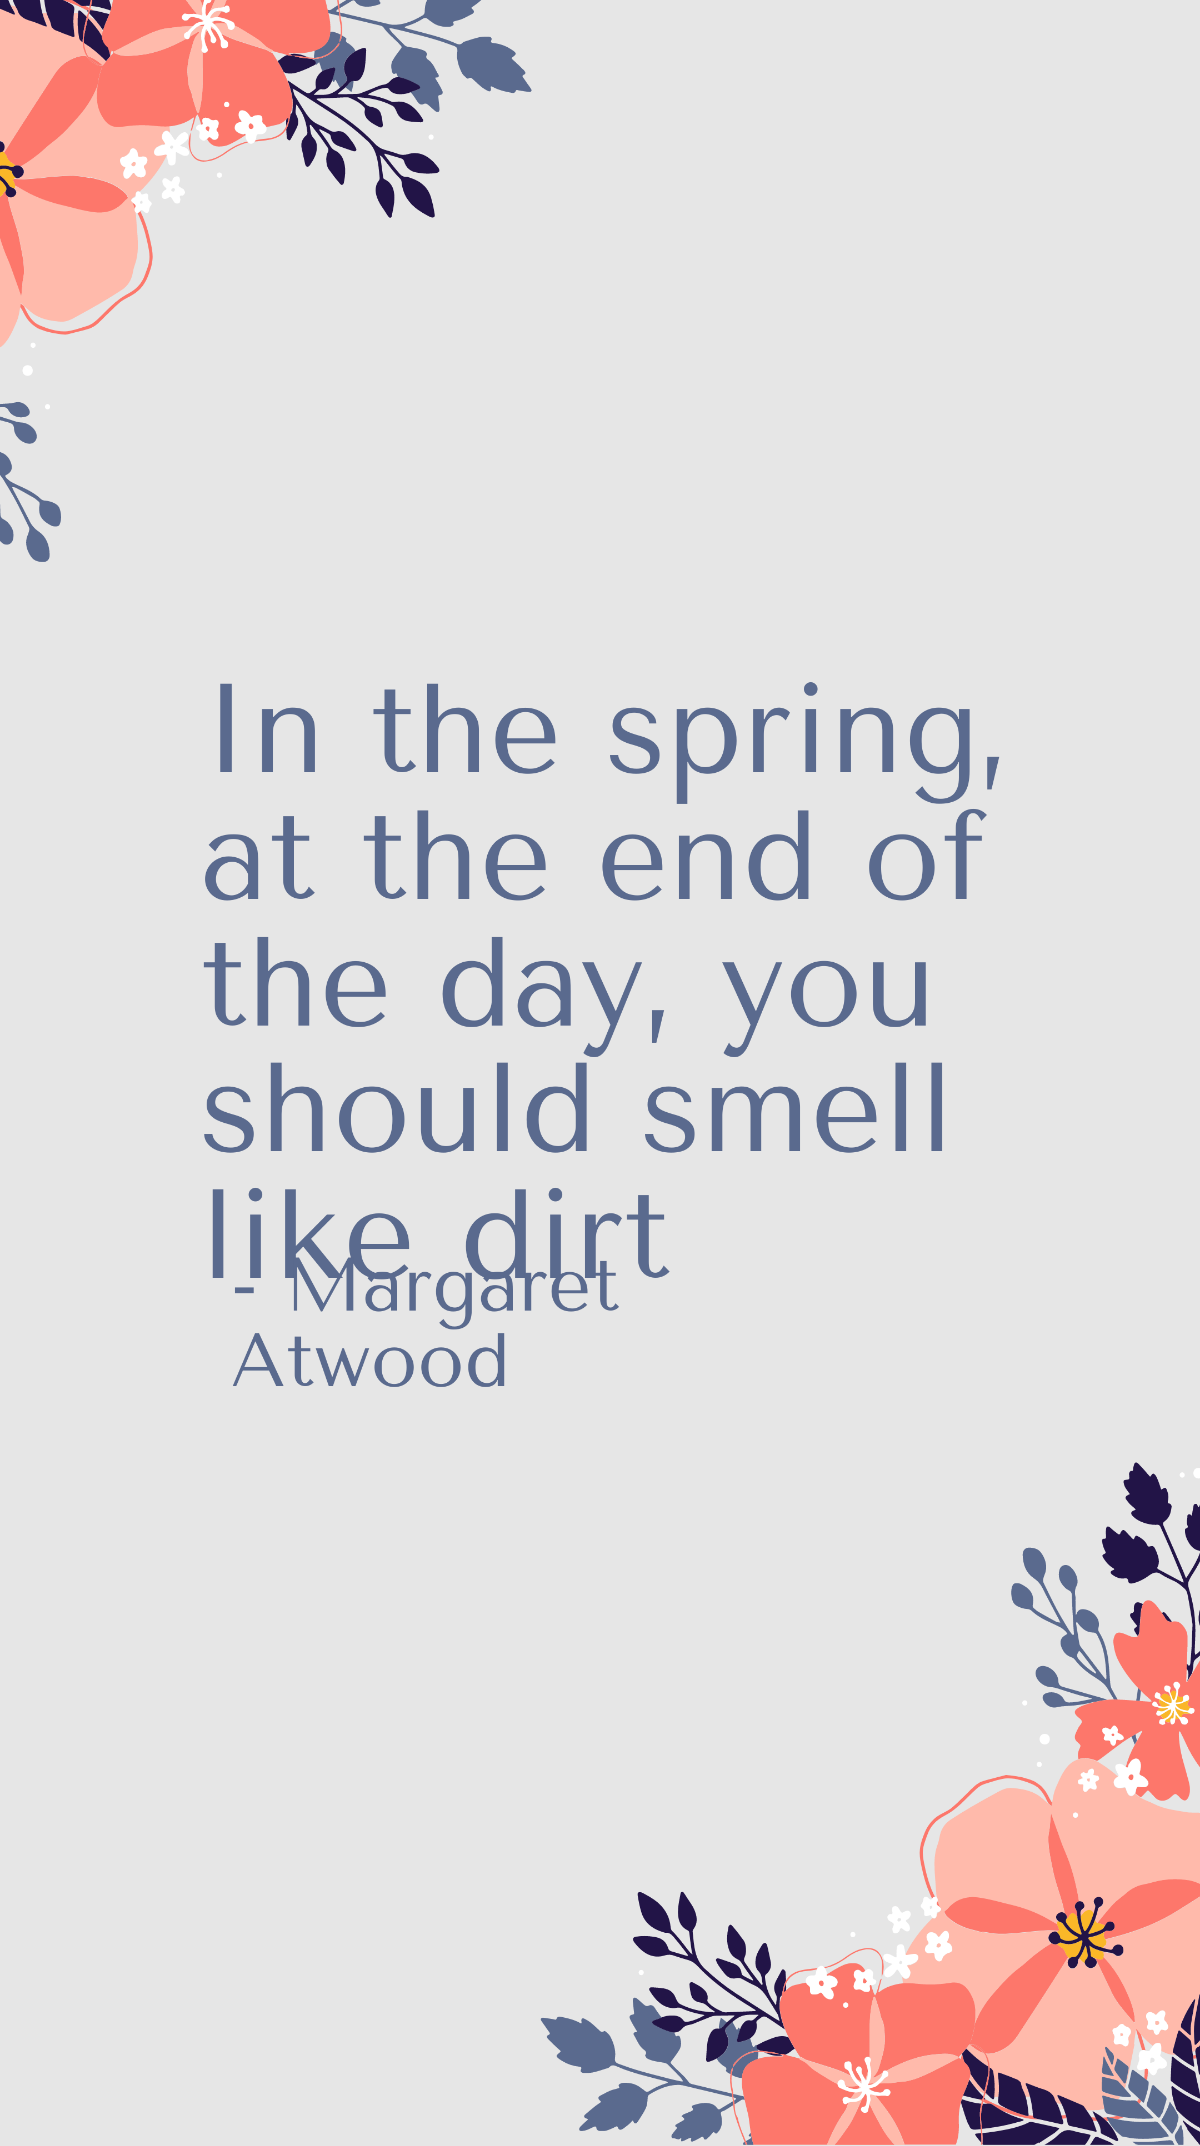 Free Margaret Atwood - In the spring, at the end of the day, you should smell like dirt Template